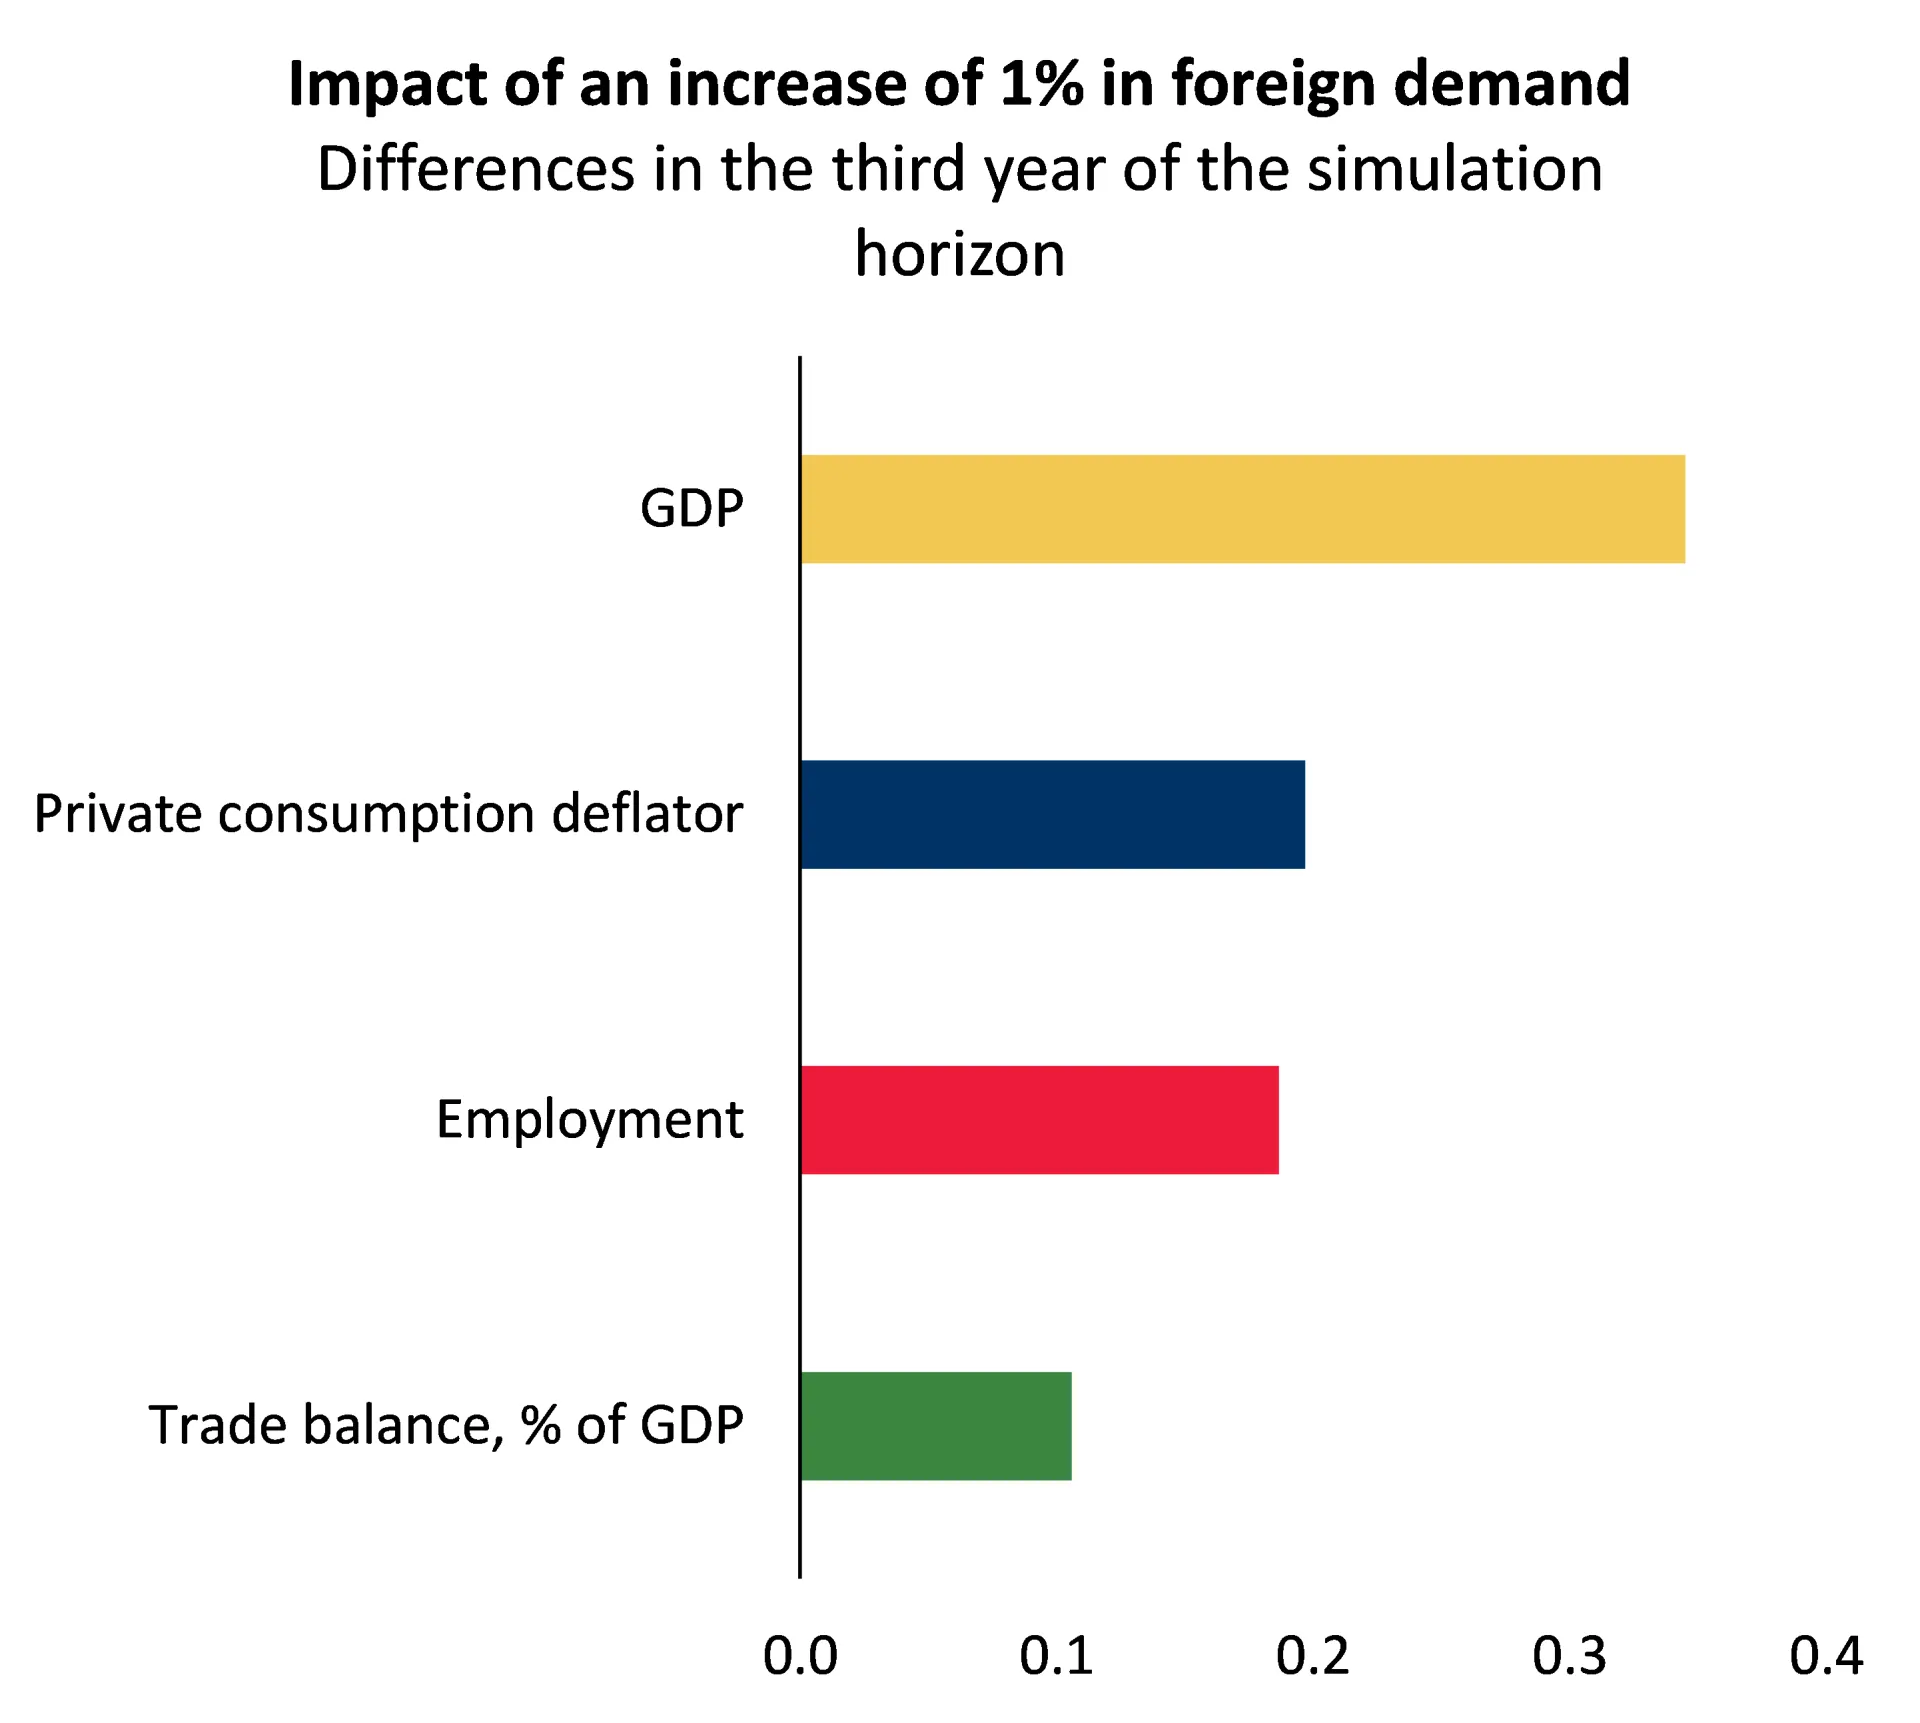 Economics in a picture: An increase in foreign demand by 1% has an impact of 0.3% on GDP after three years